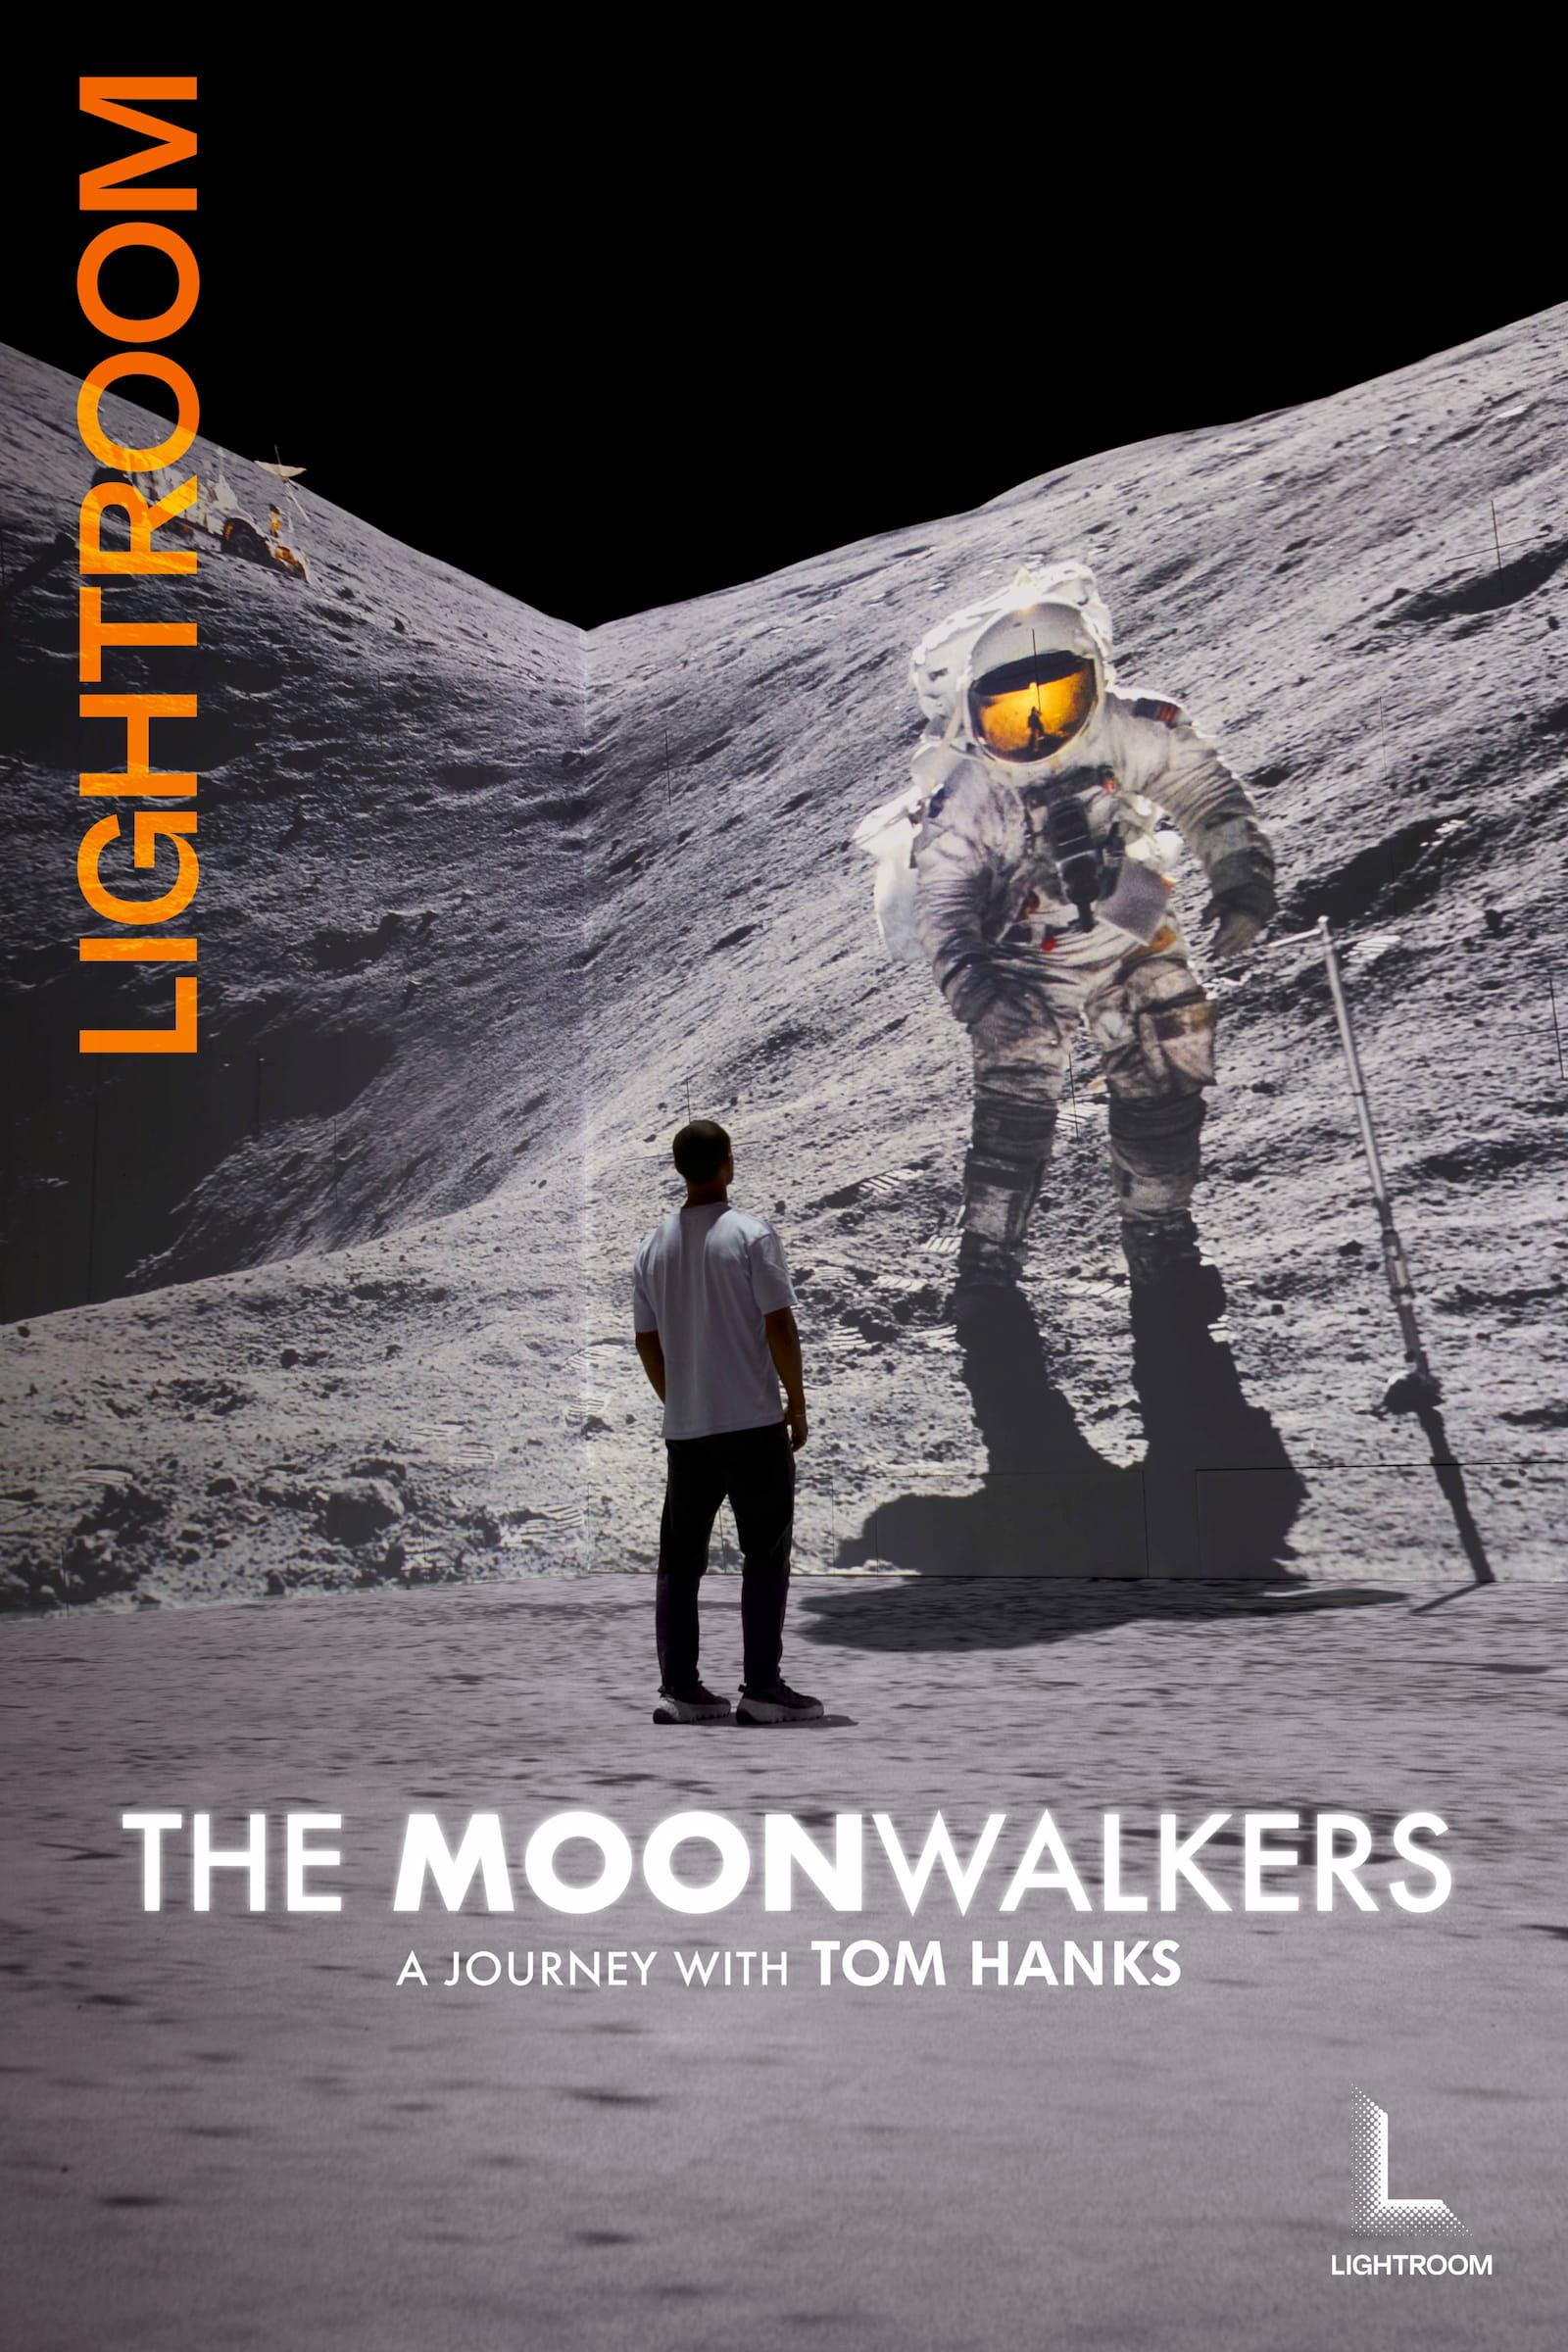 The Moonwalkers: A Journey With Tom Hanks